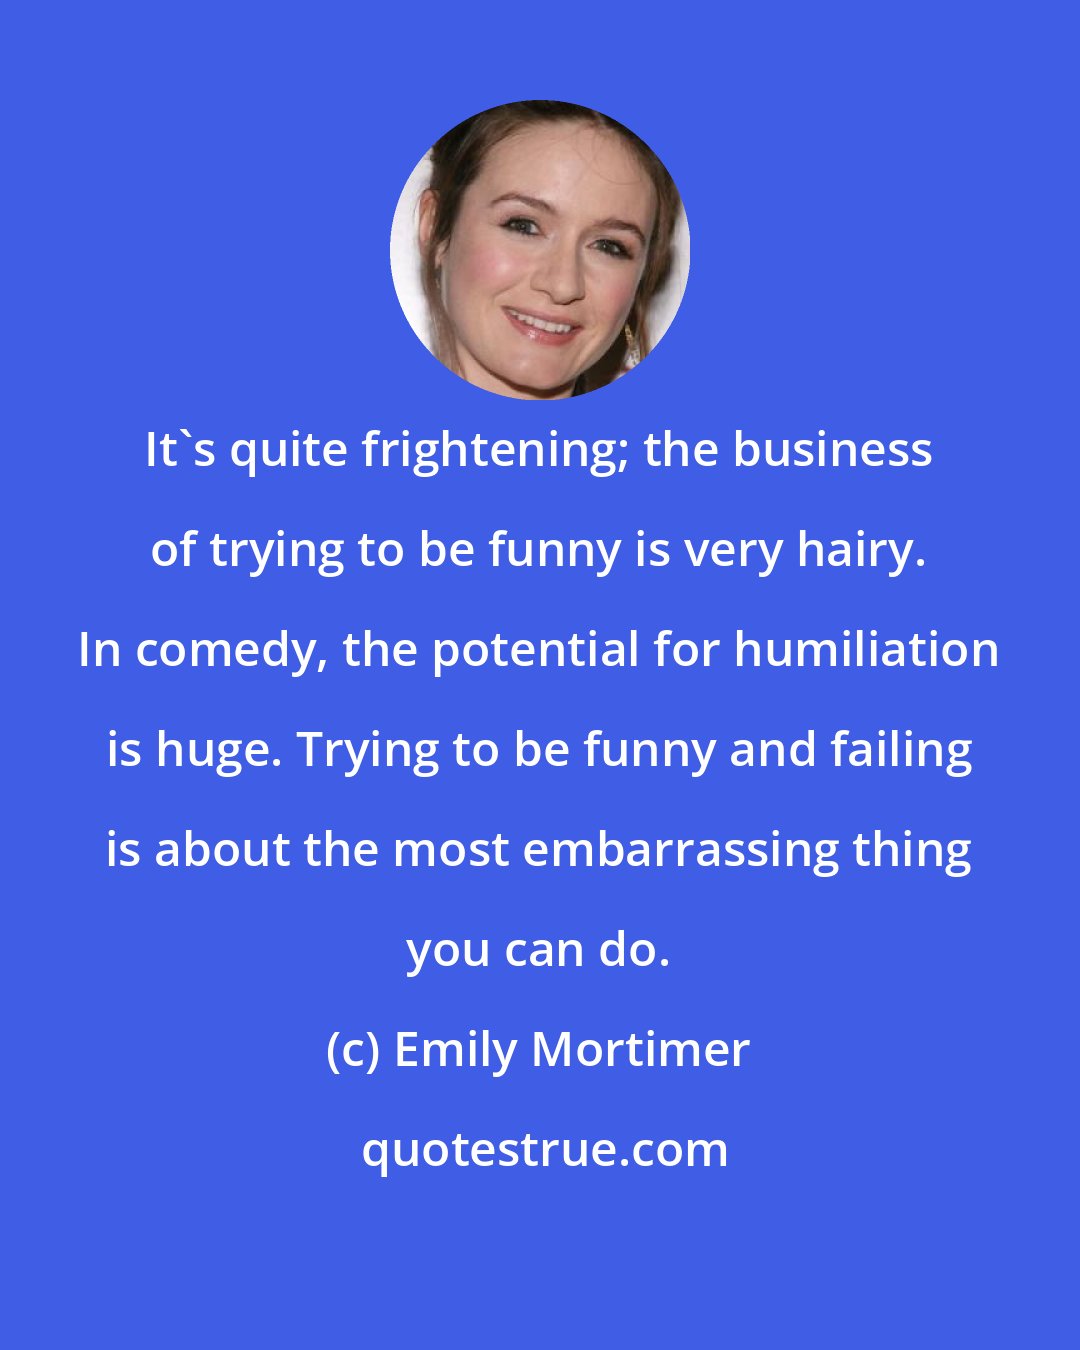 Emily Mortimer: It's quite frightening; the business of trying to be funny is very hairy. In comedy, the potential for humiliation is huge. Trying to be funny and failing is about the most embarrassing thing you can do.